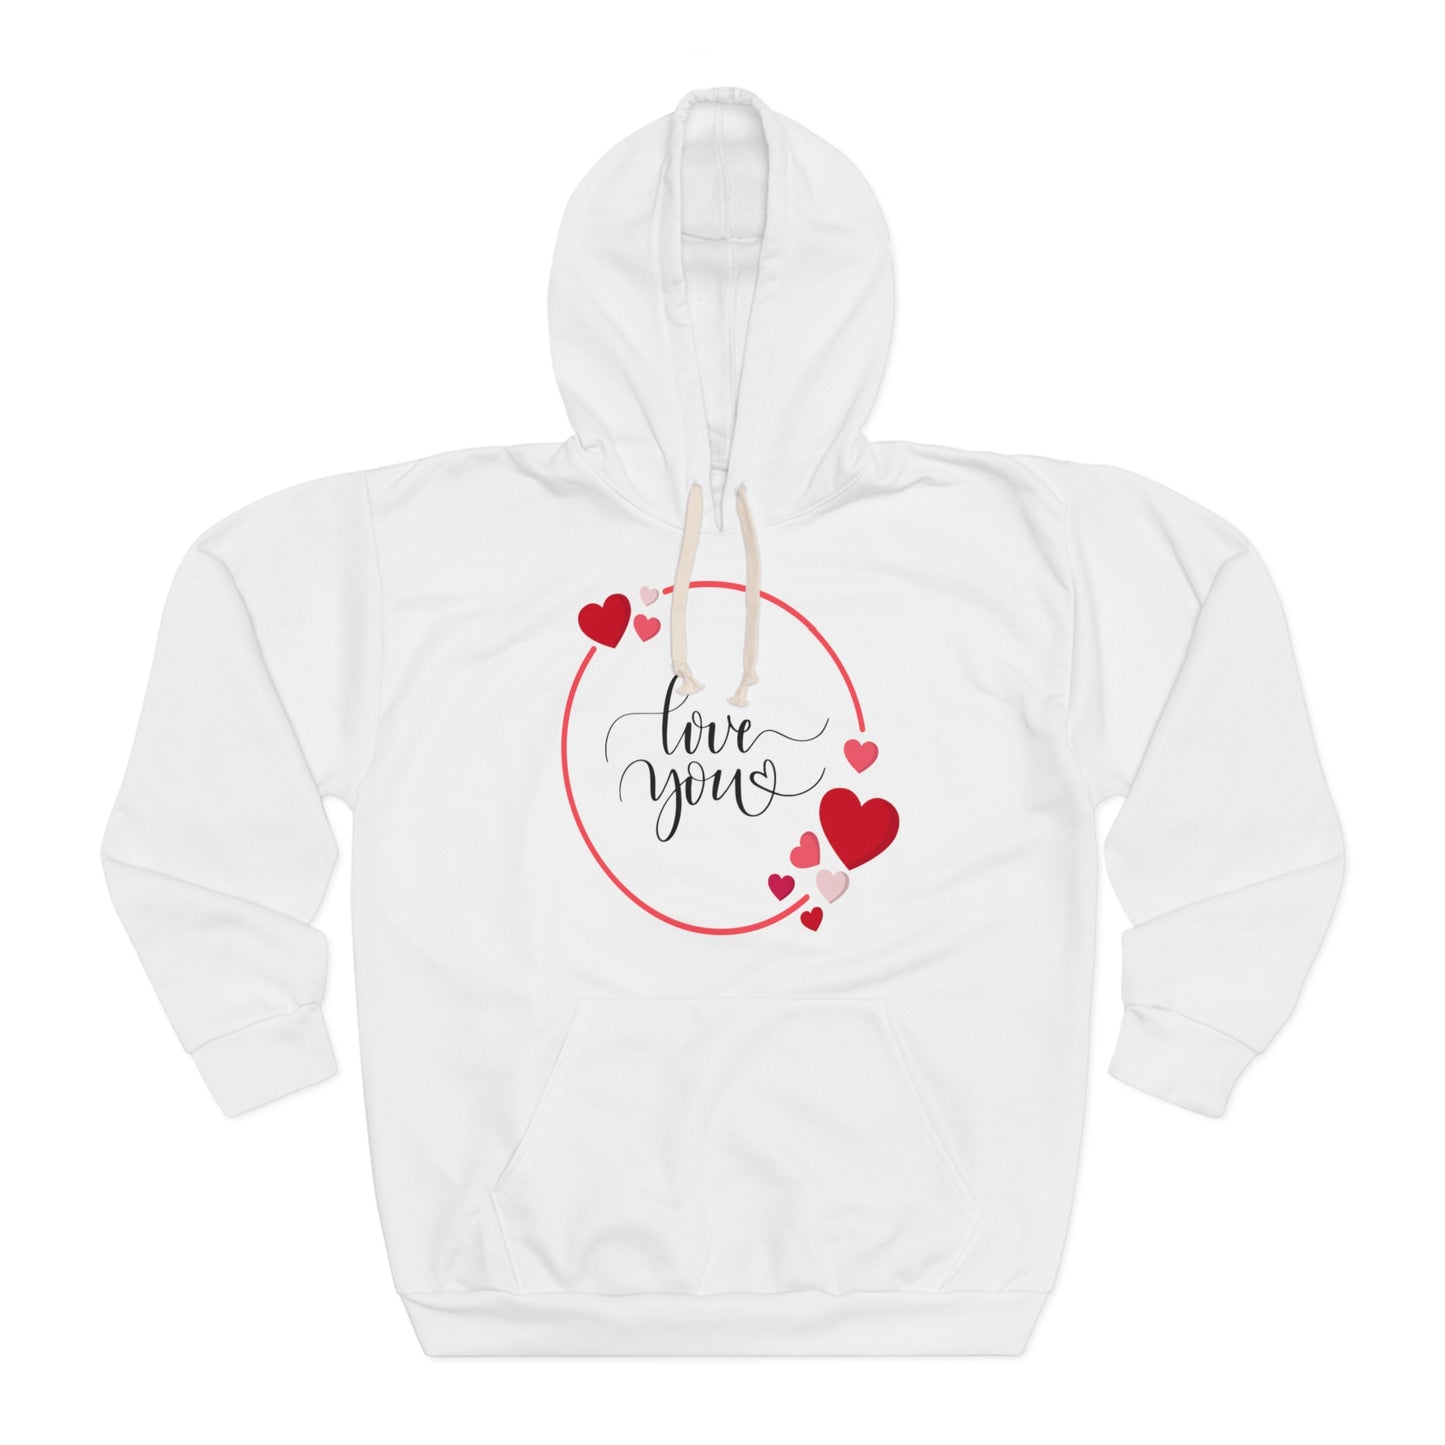 Love You with Hearts Printed Unisex Pullover Hoodie, Red & White